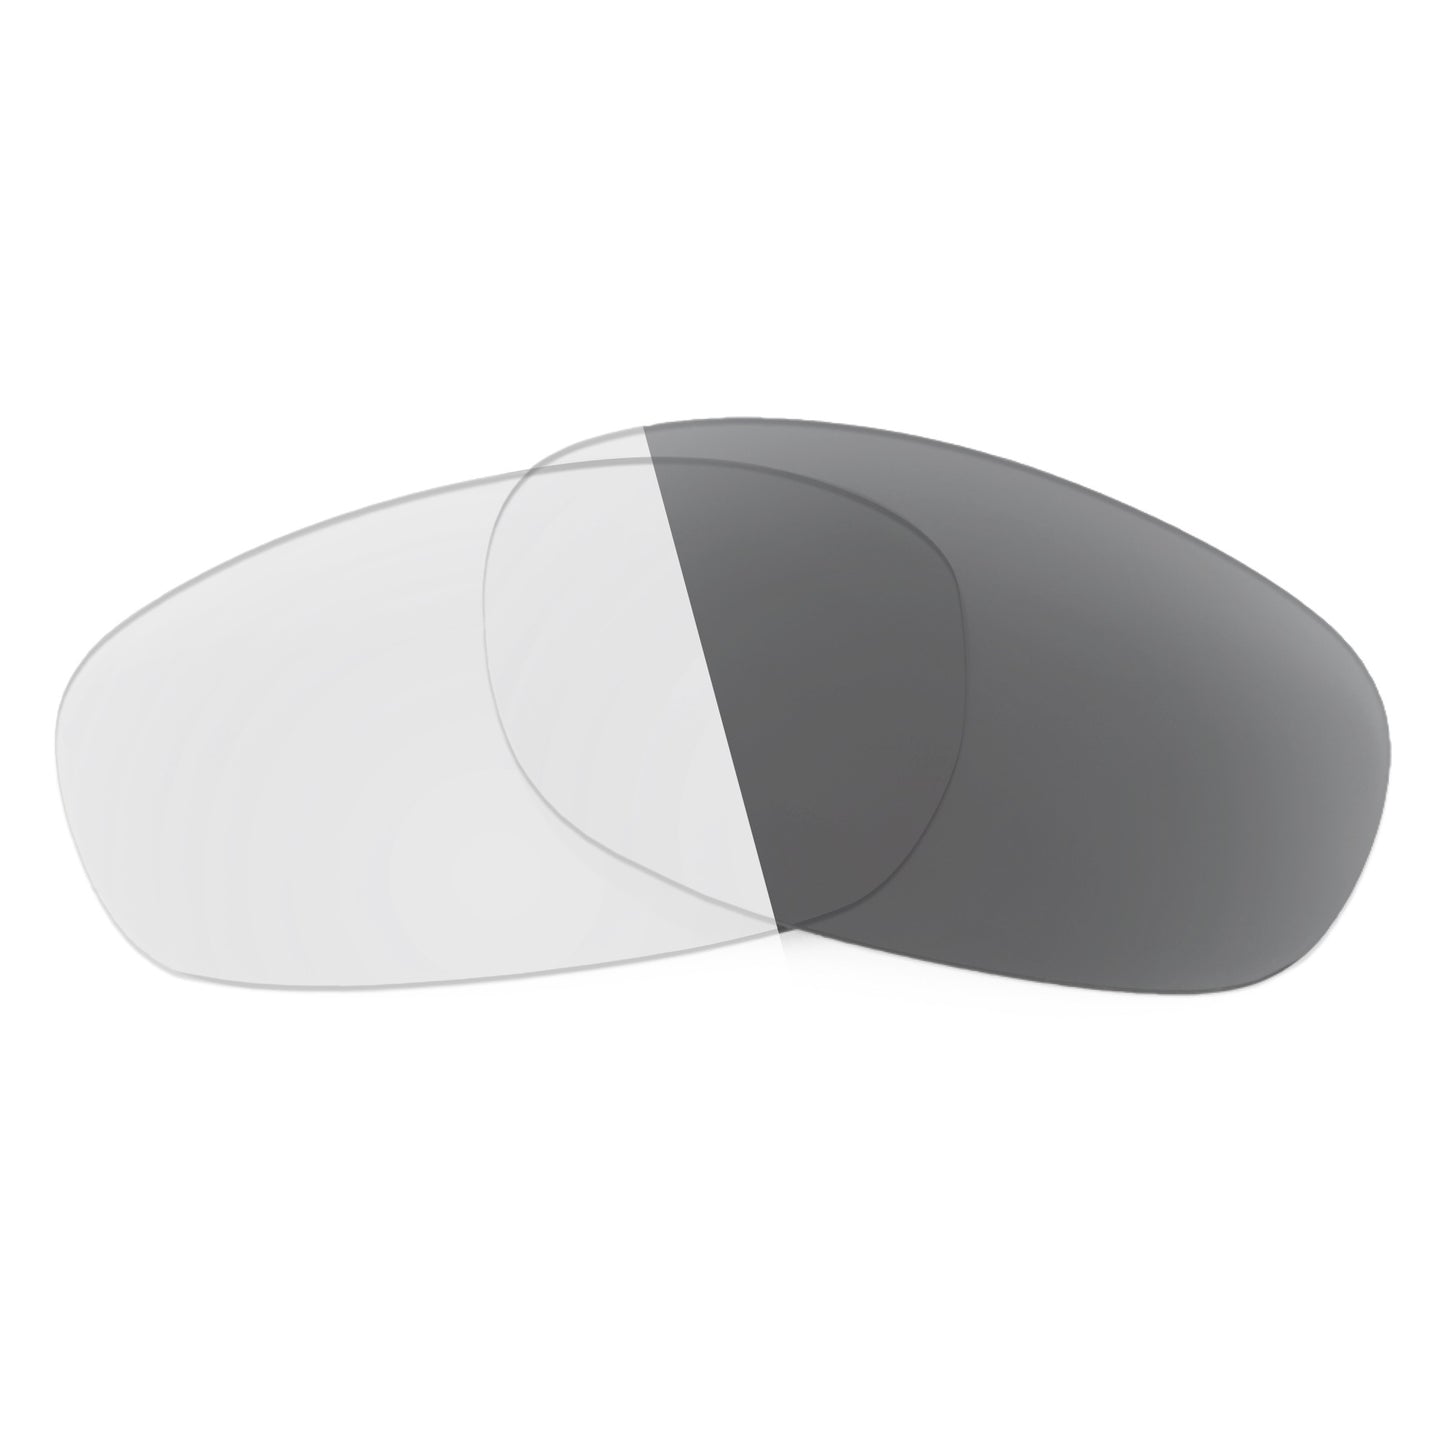 Revant replacement lenses for Ray-Ban Highstreet RB3023 Non-Polarized Adapt Gray Photochromic